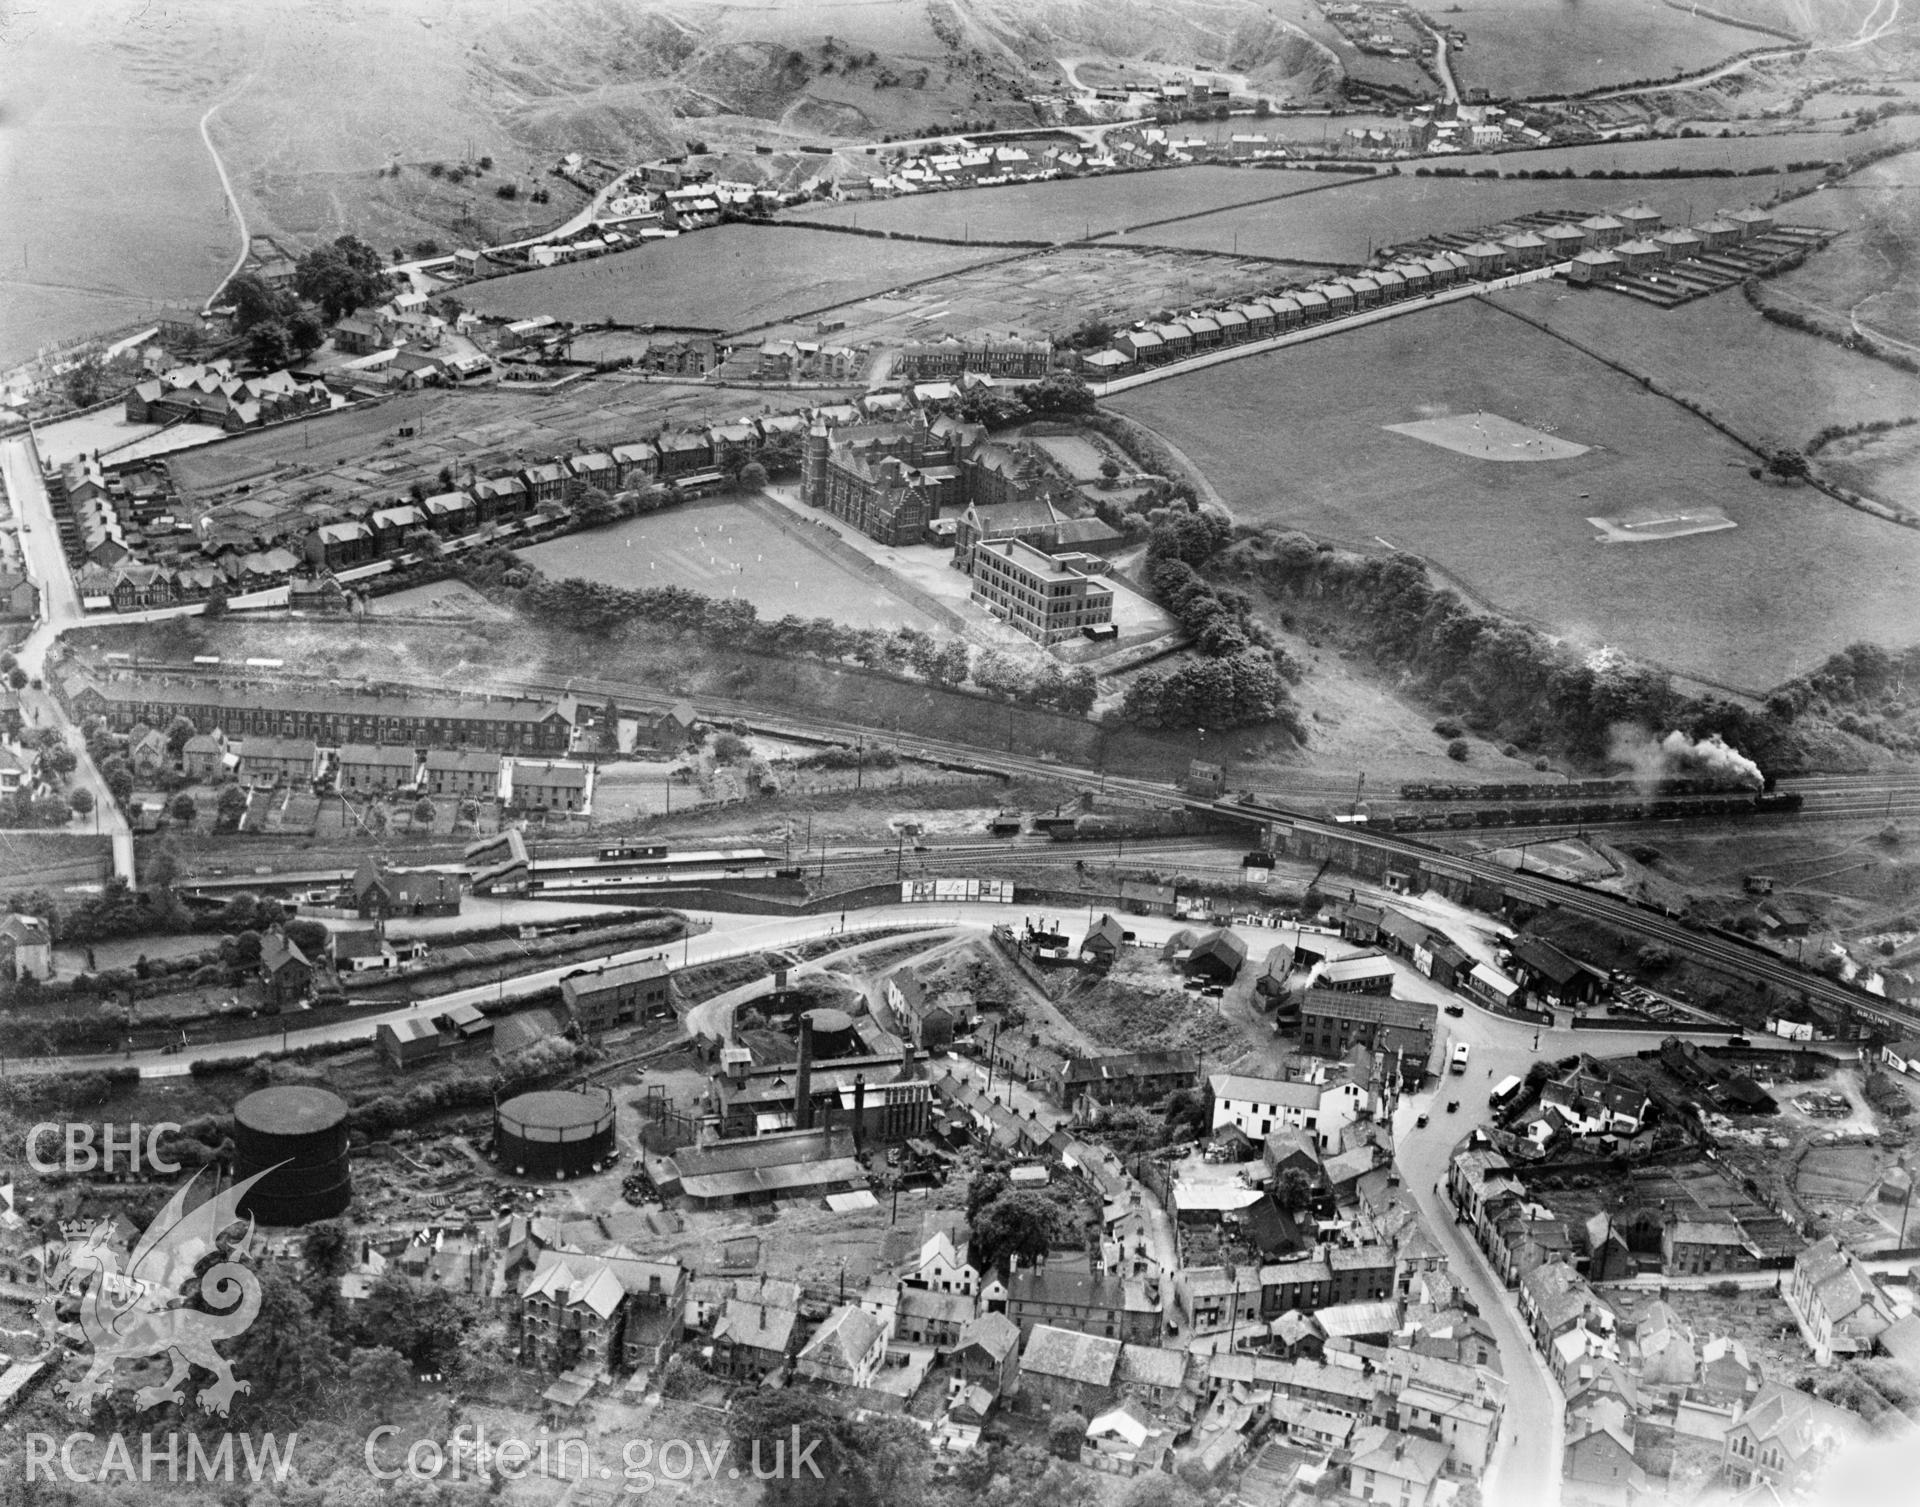 View of West Monmouth School, Pontypool, oblique aerial view. 5?x4? black and white glass plate negative.